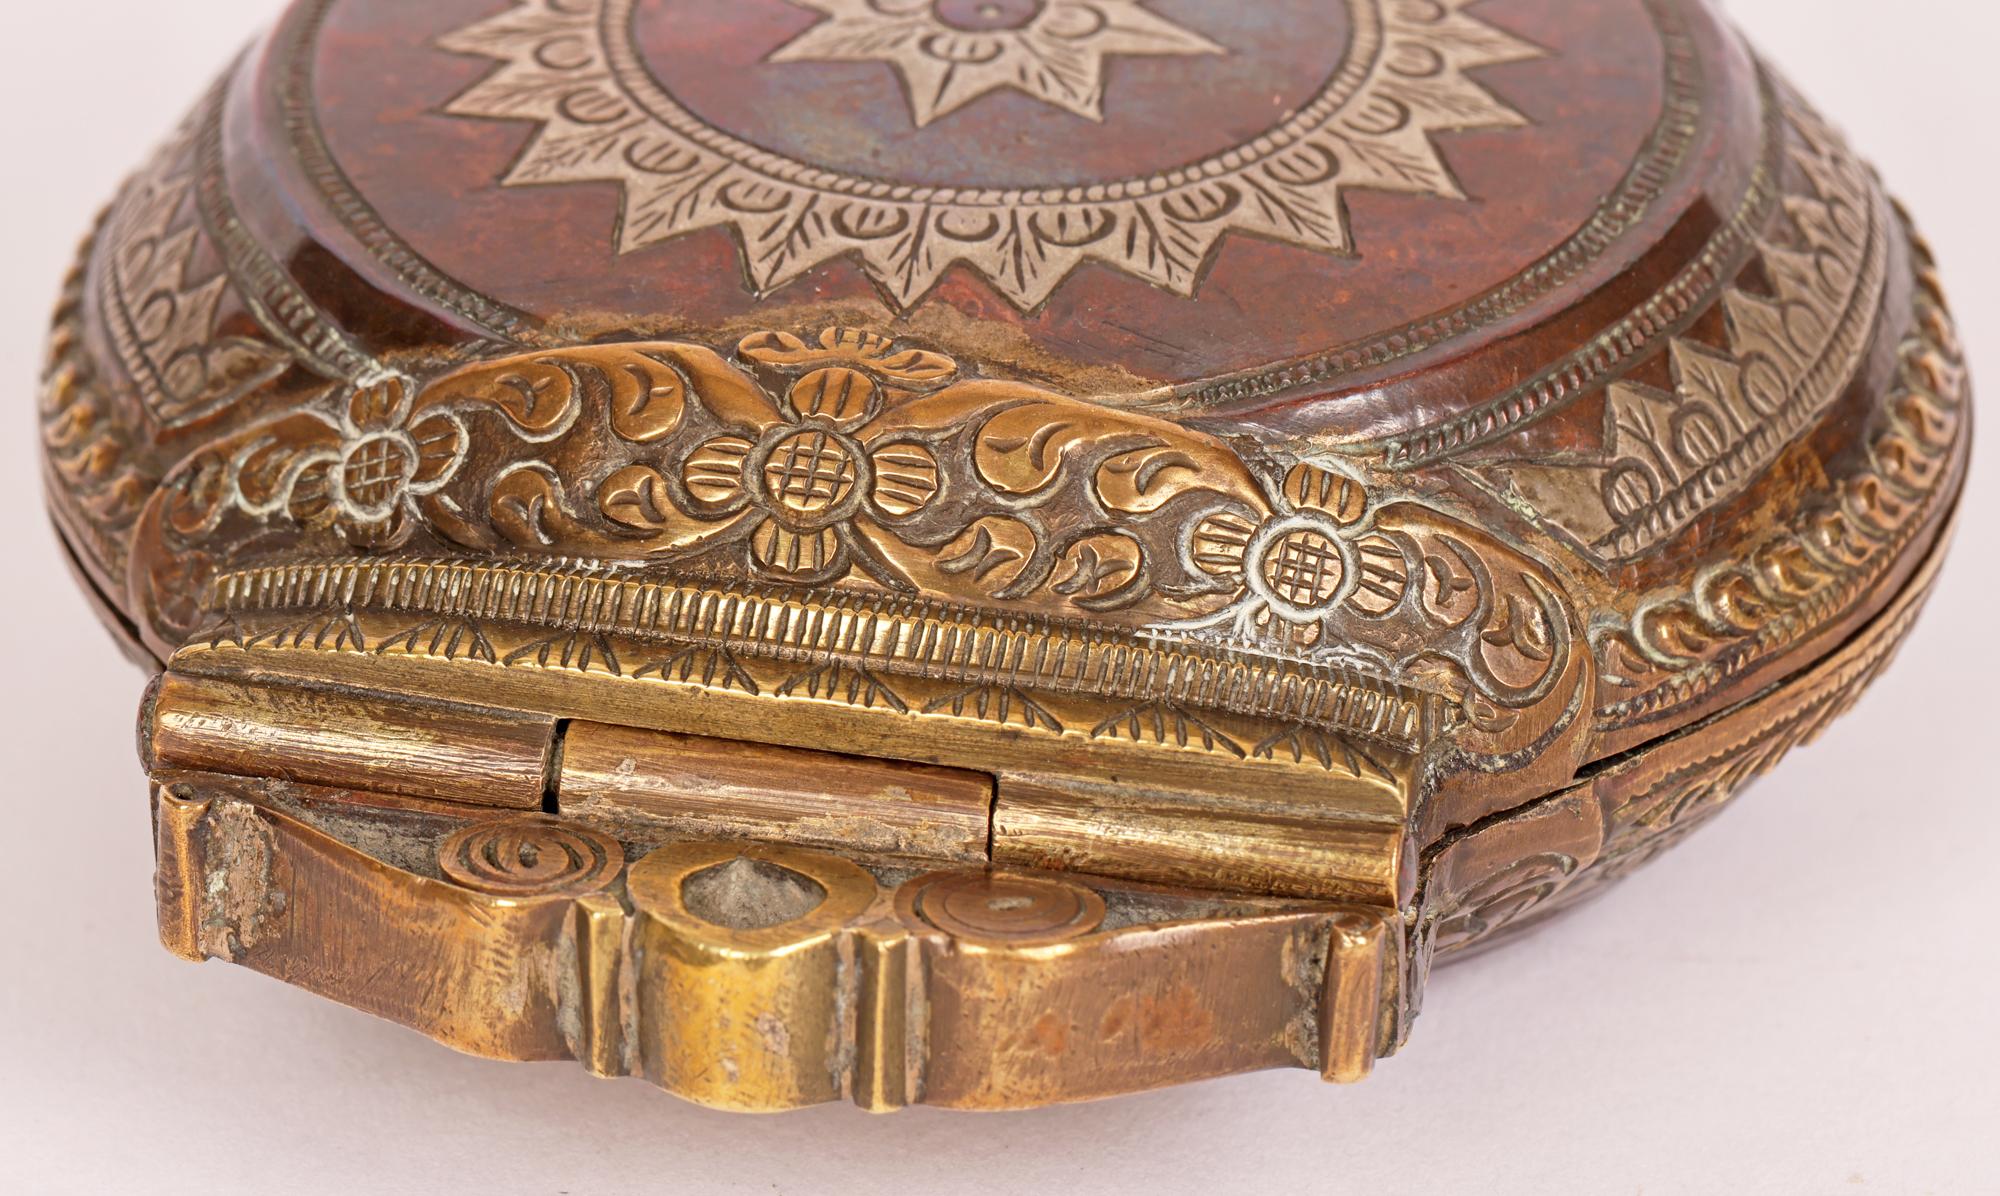 A good quality antique Sri Lankan copper and brass betel lime box with silver inlay and floral applications dating from the 18th or 19th century. Known in Sri Lanka as a Killotaya the box is of flattened round form with an ornate scroll work hinged